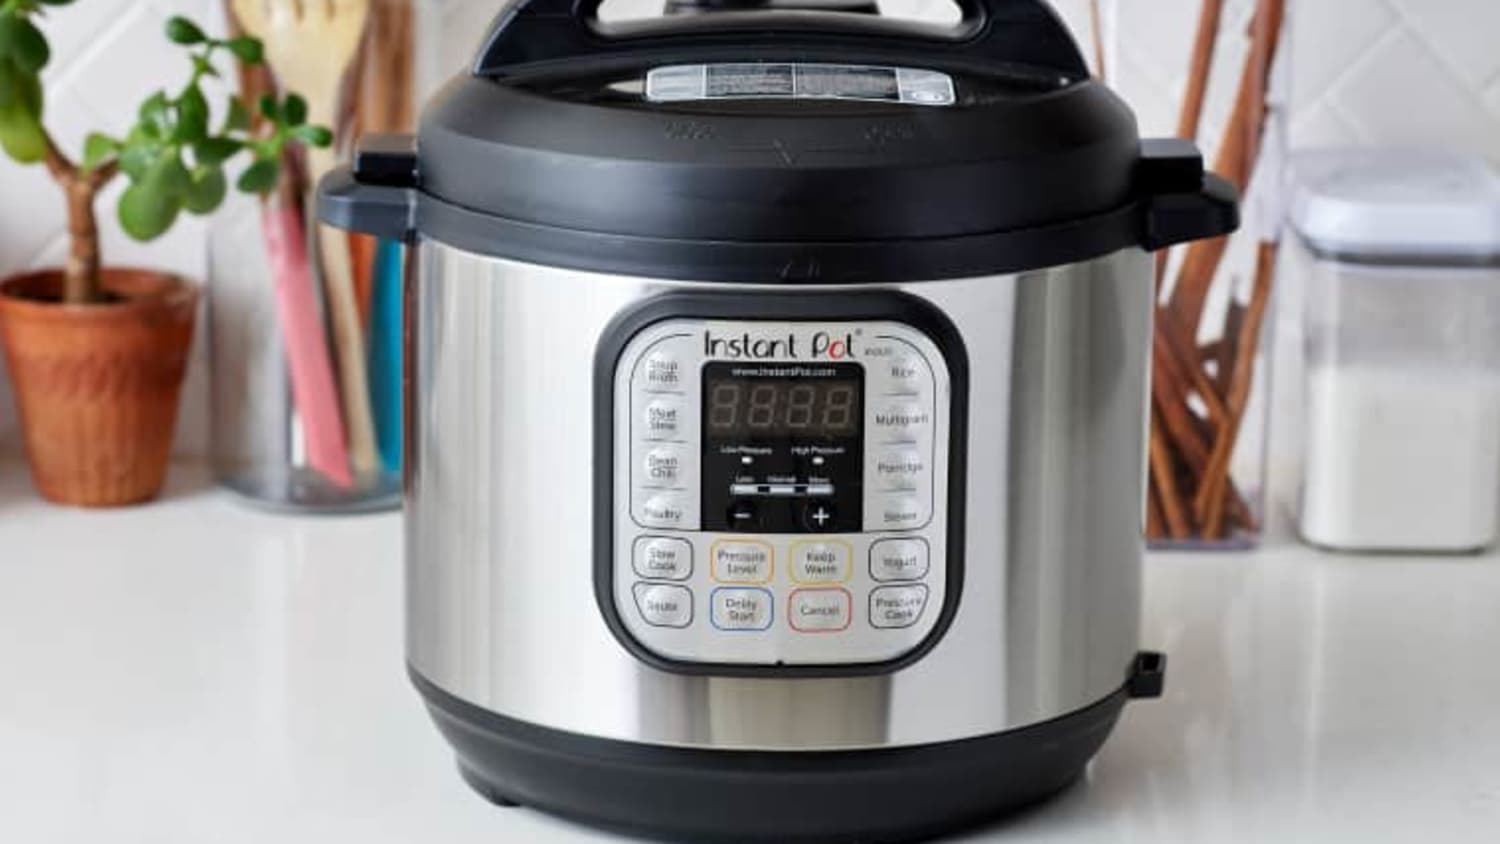 What Is An Instant Pot? 13 Things To Know Before Buying An Instant Pot ...